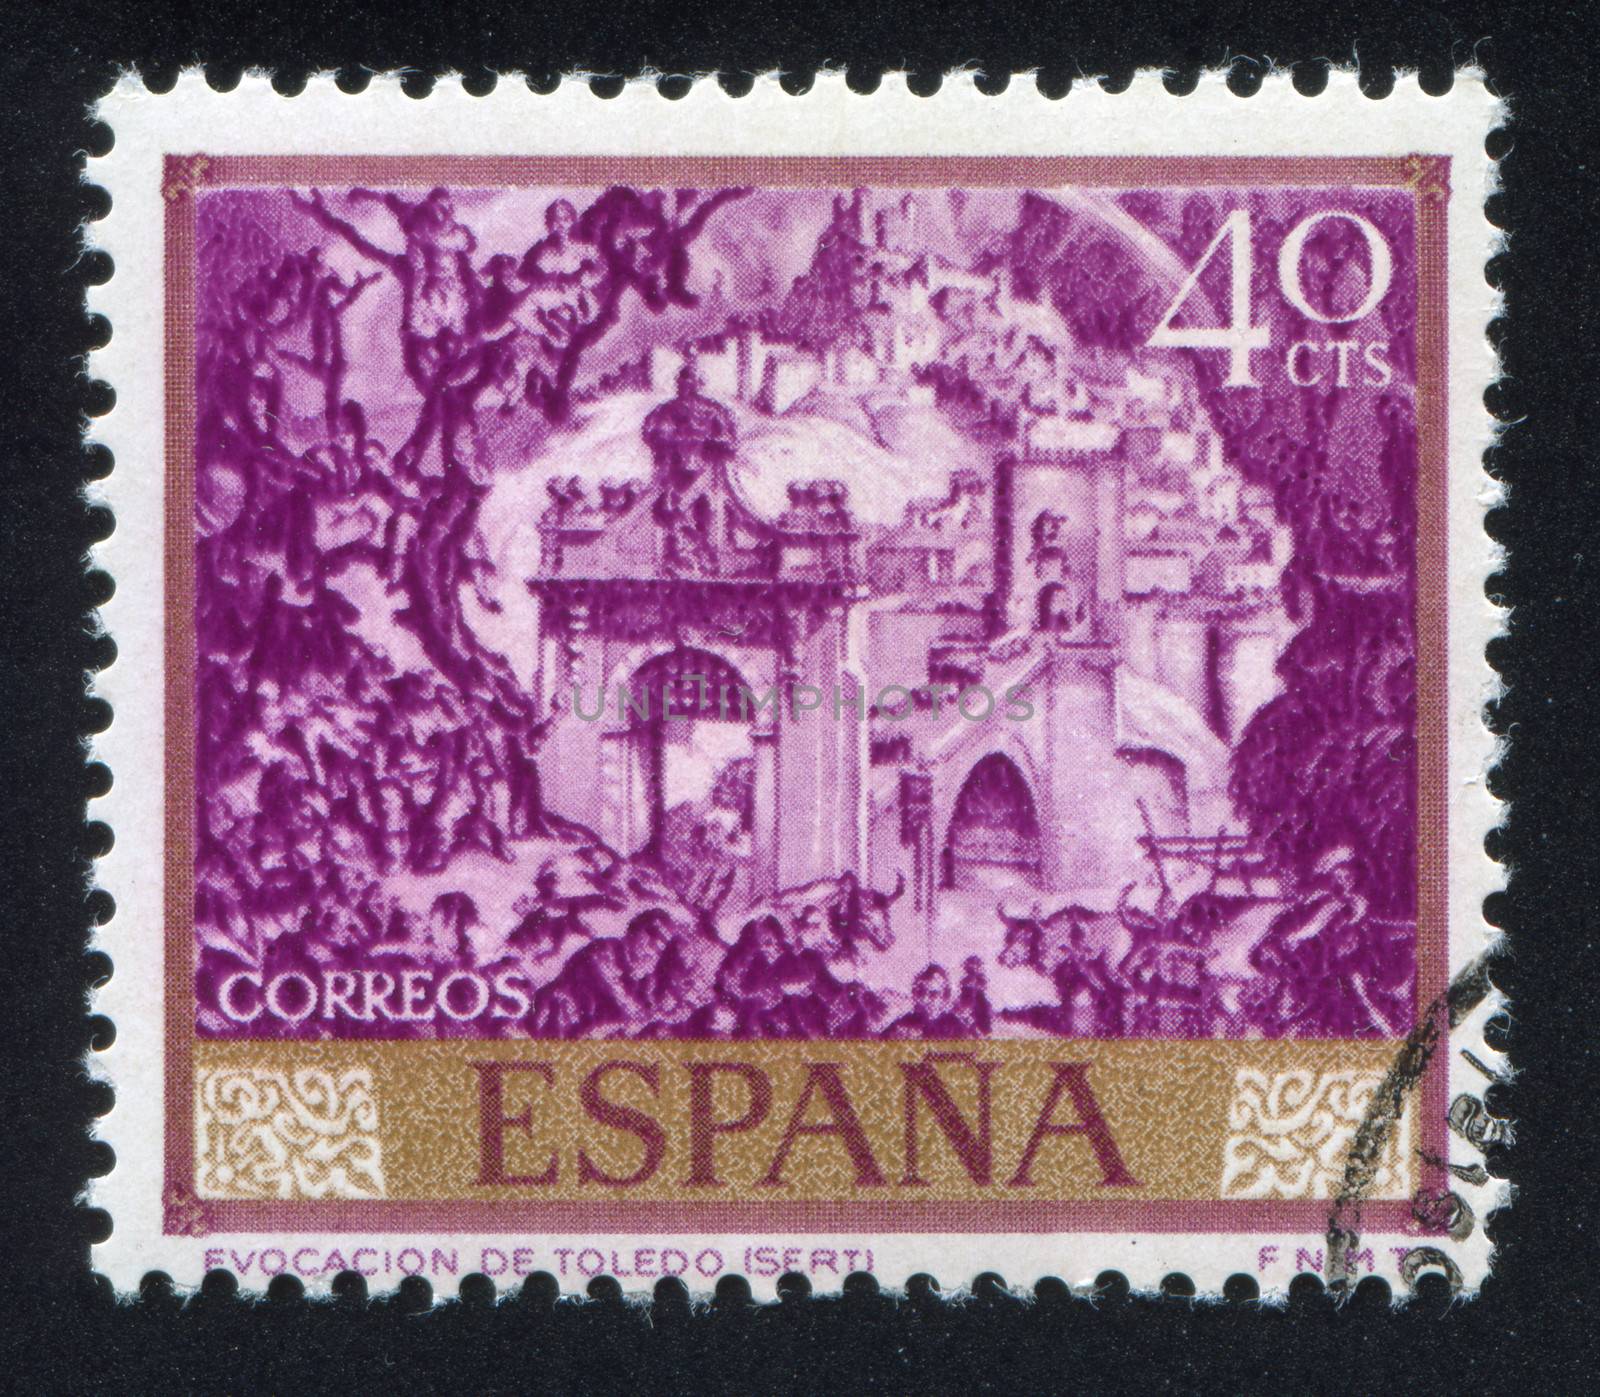 SPAIN - CIRCA 1966: stamp printed by Spain, shows Evocation of Toledo by Sert, circa 1966